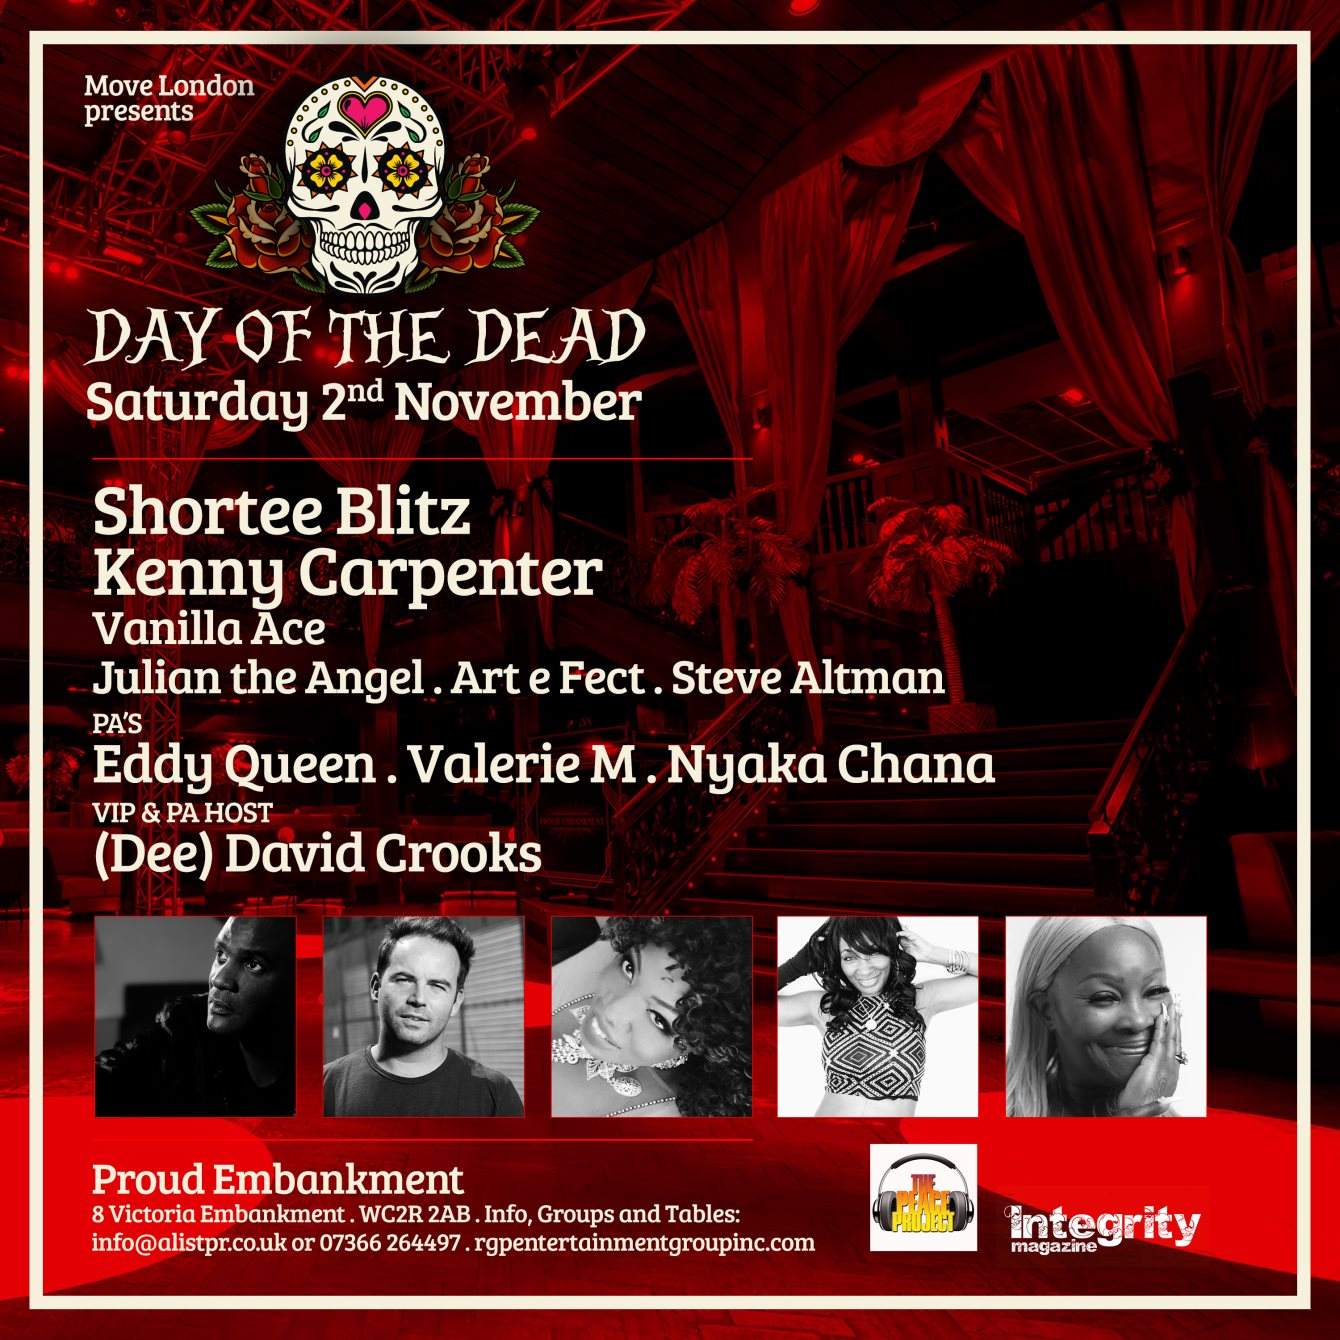 Day of the Dead - A Stunning Immersive Halloween Party with Kenny Carpenter and Shortee Blitz - Página trasera